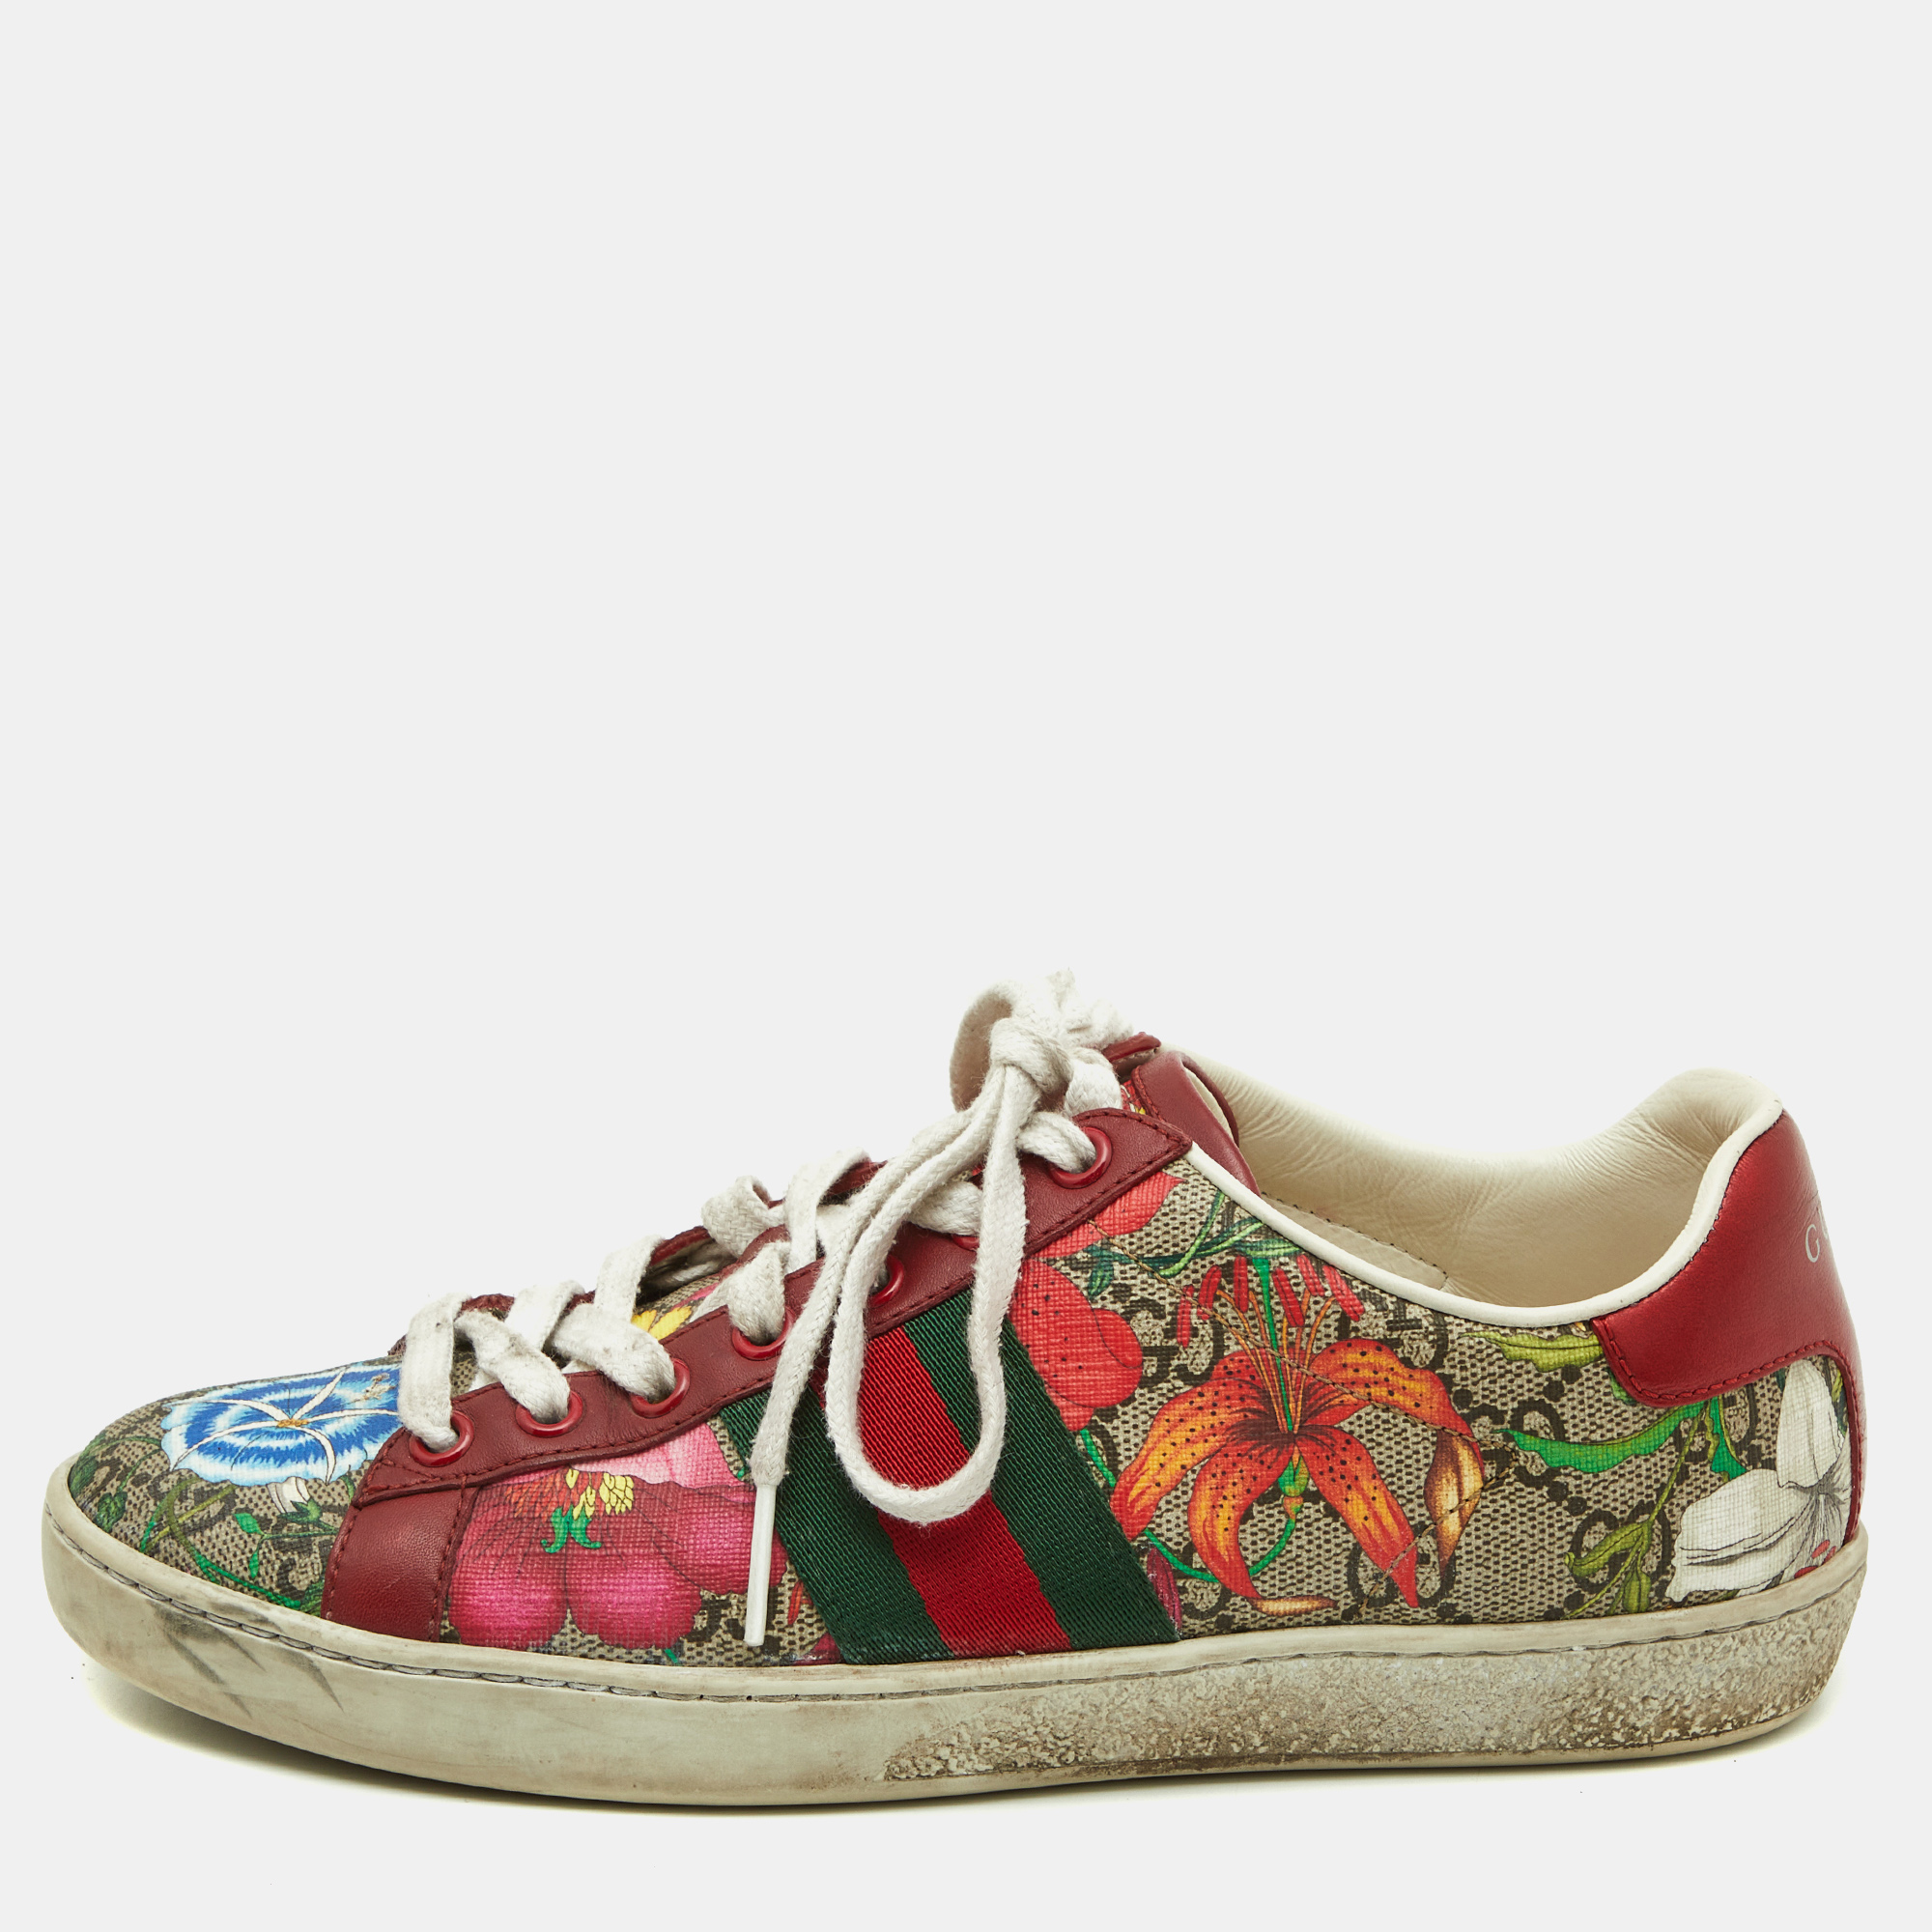 Pre-owned Gucci Multicolor Floral Print Gg Supreme Canvas And Leather Ace Low Top Trainers Size 36